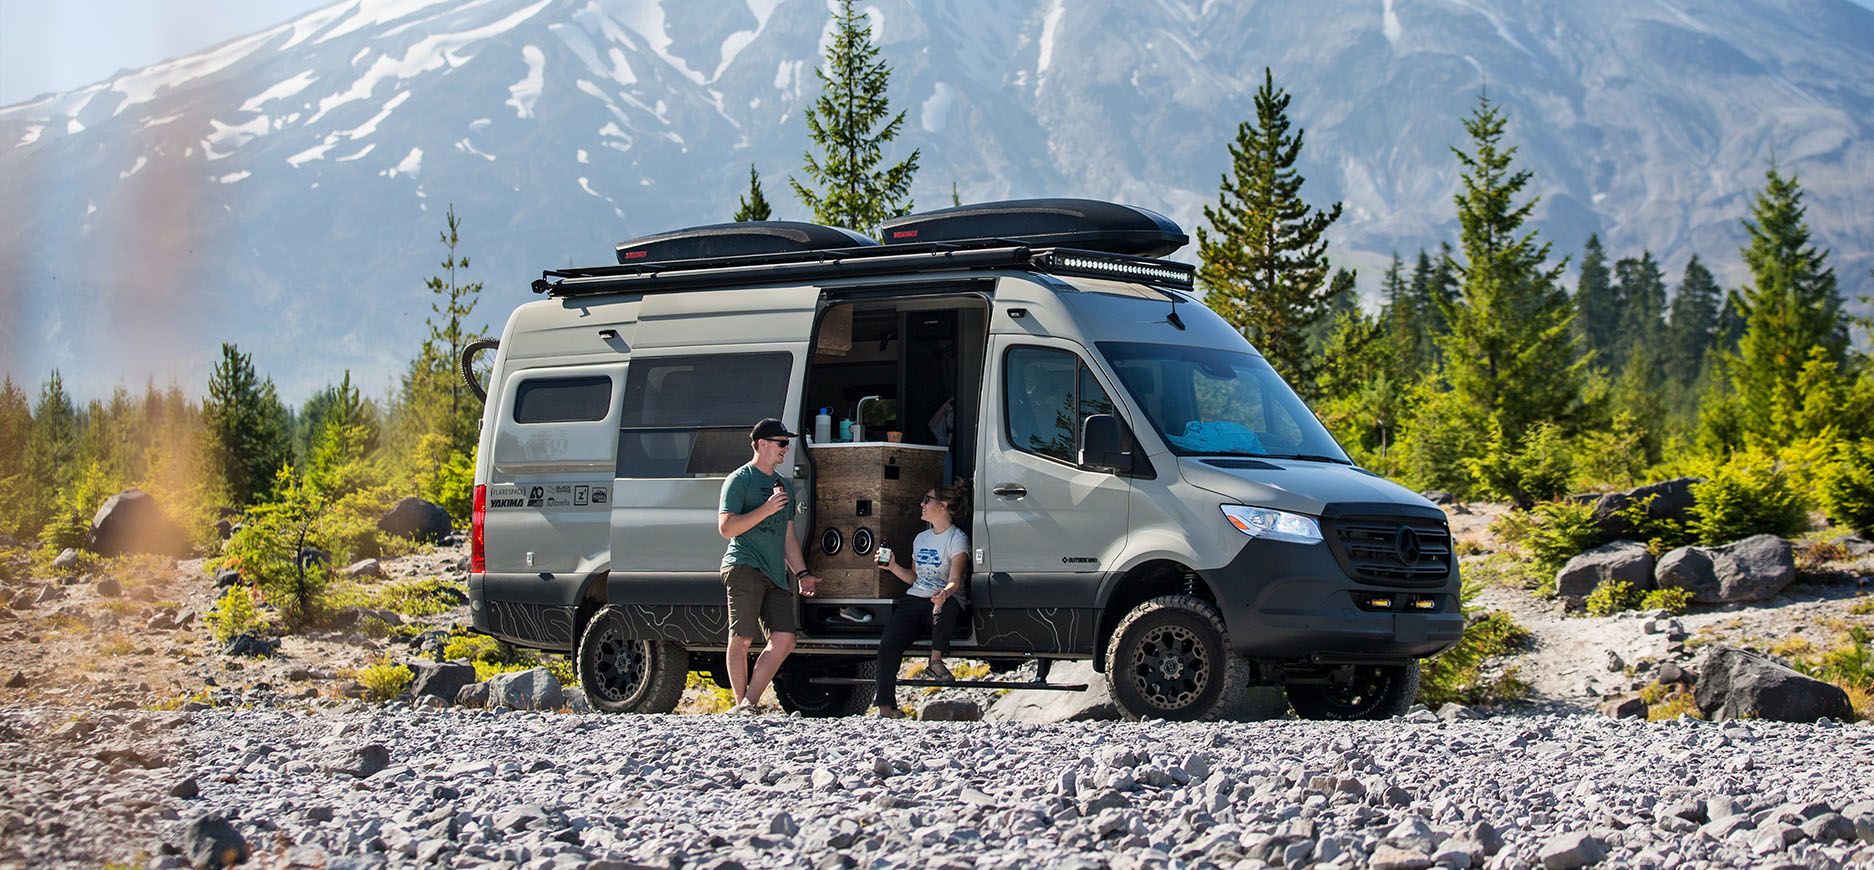 Want to Buy a Camper Van? Here Are the Brands to Shop